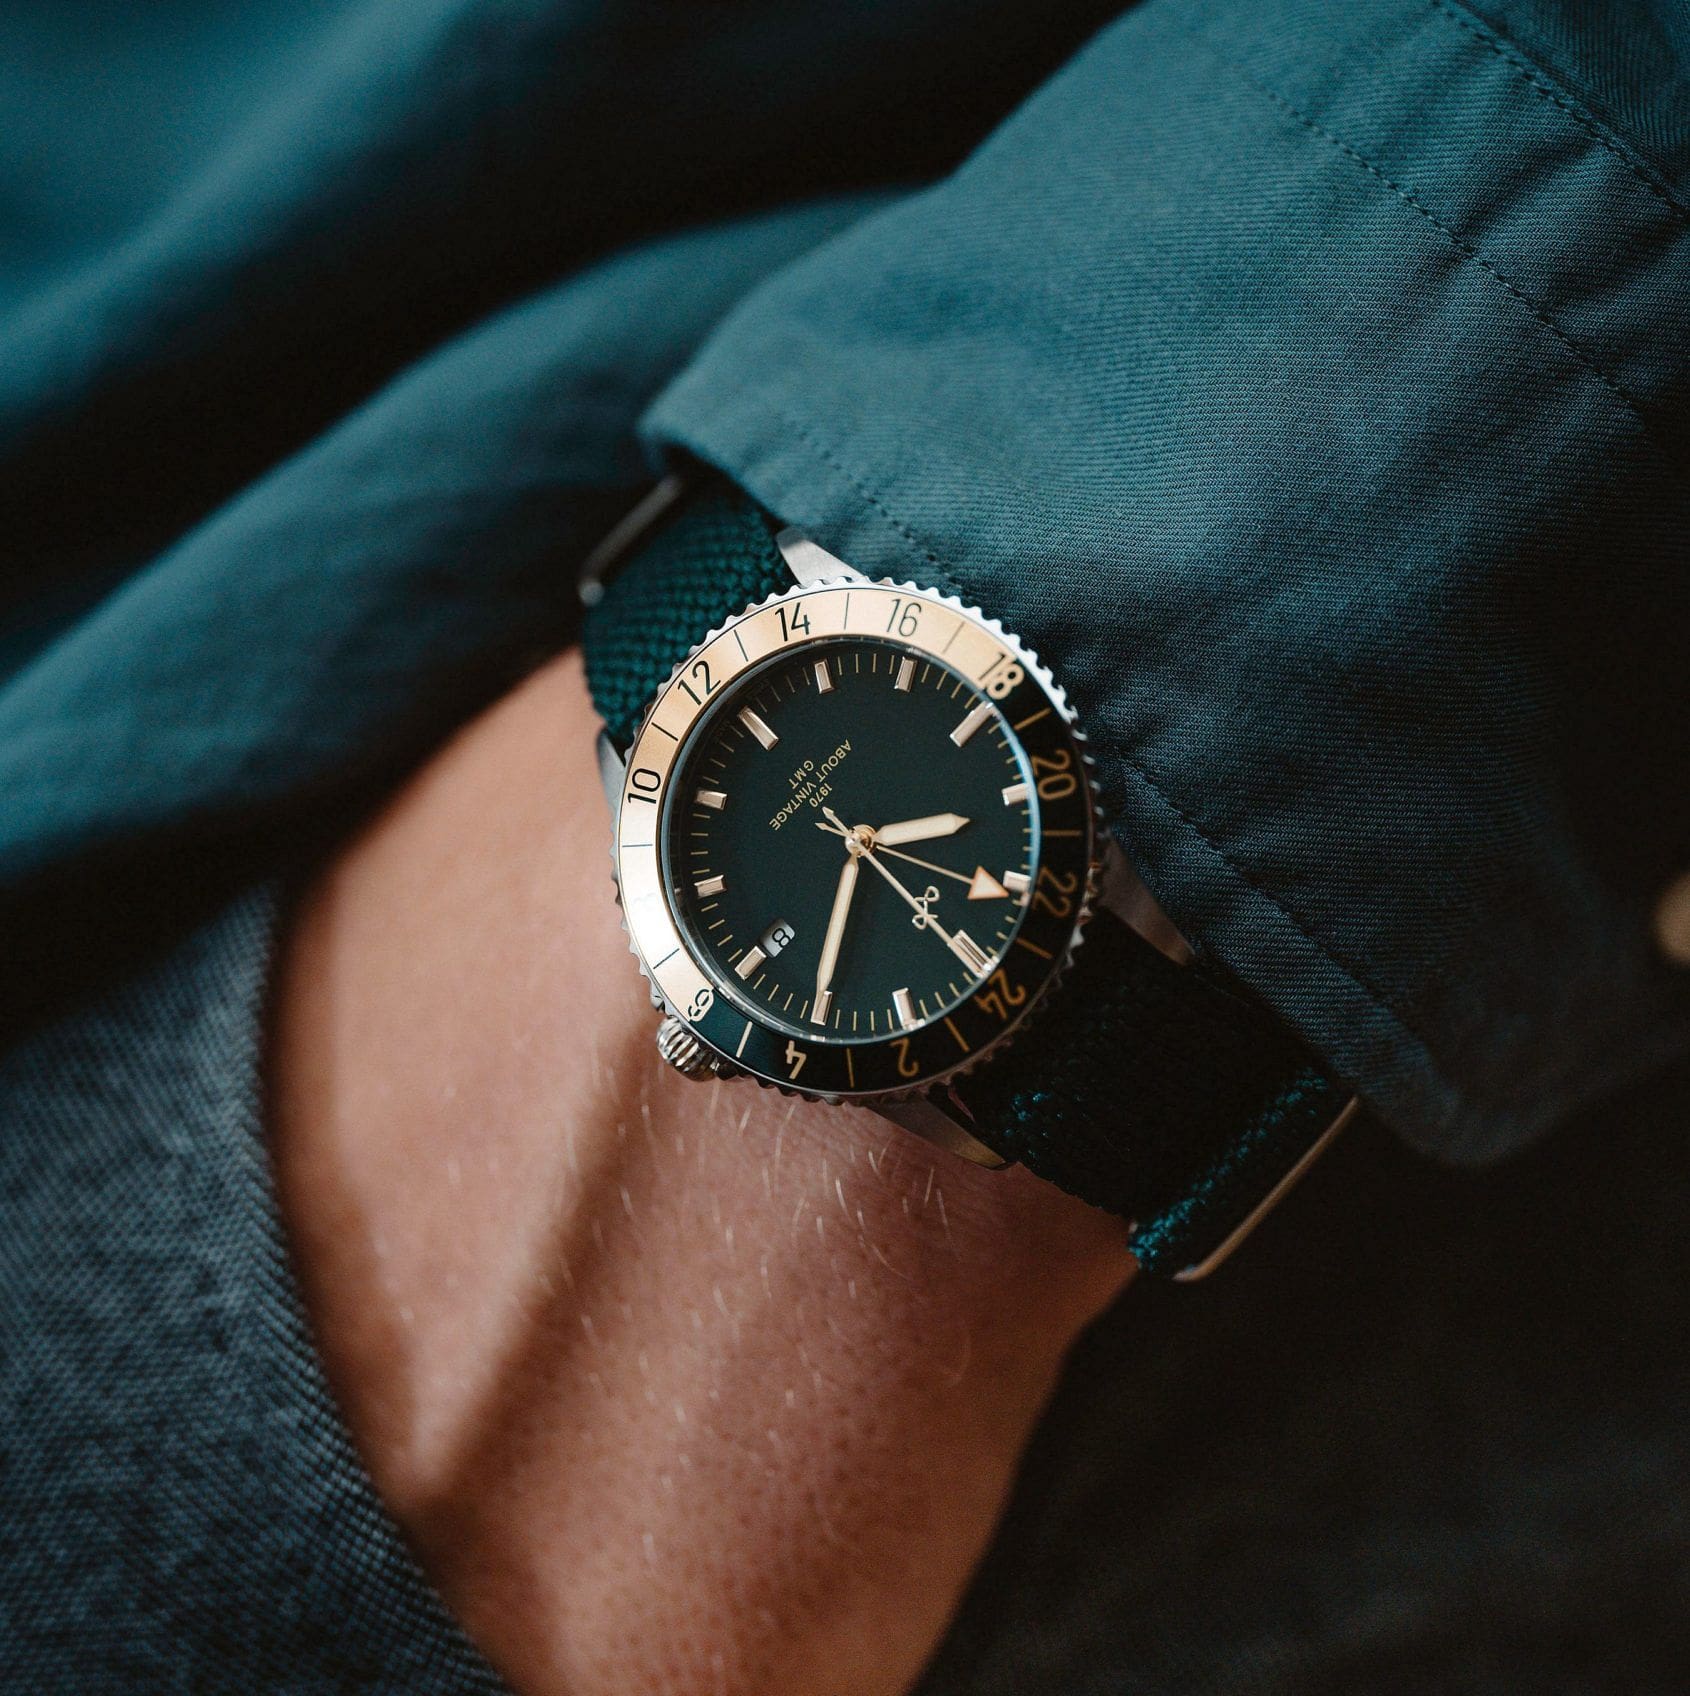 MICRO MONDAYS: Go green with the About Vintage x Kristian Haagen 1970 GMT